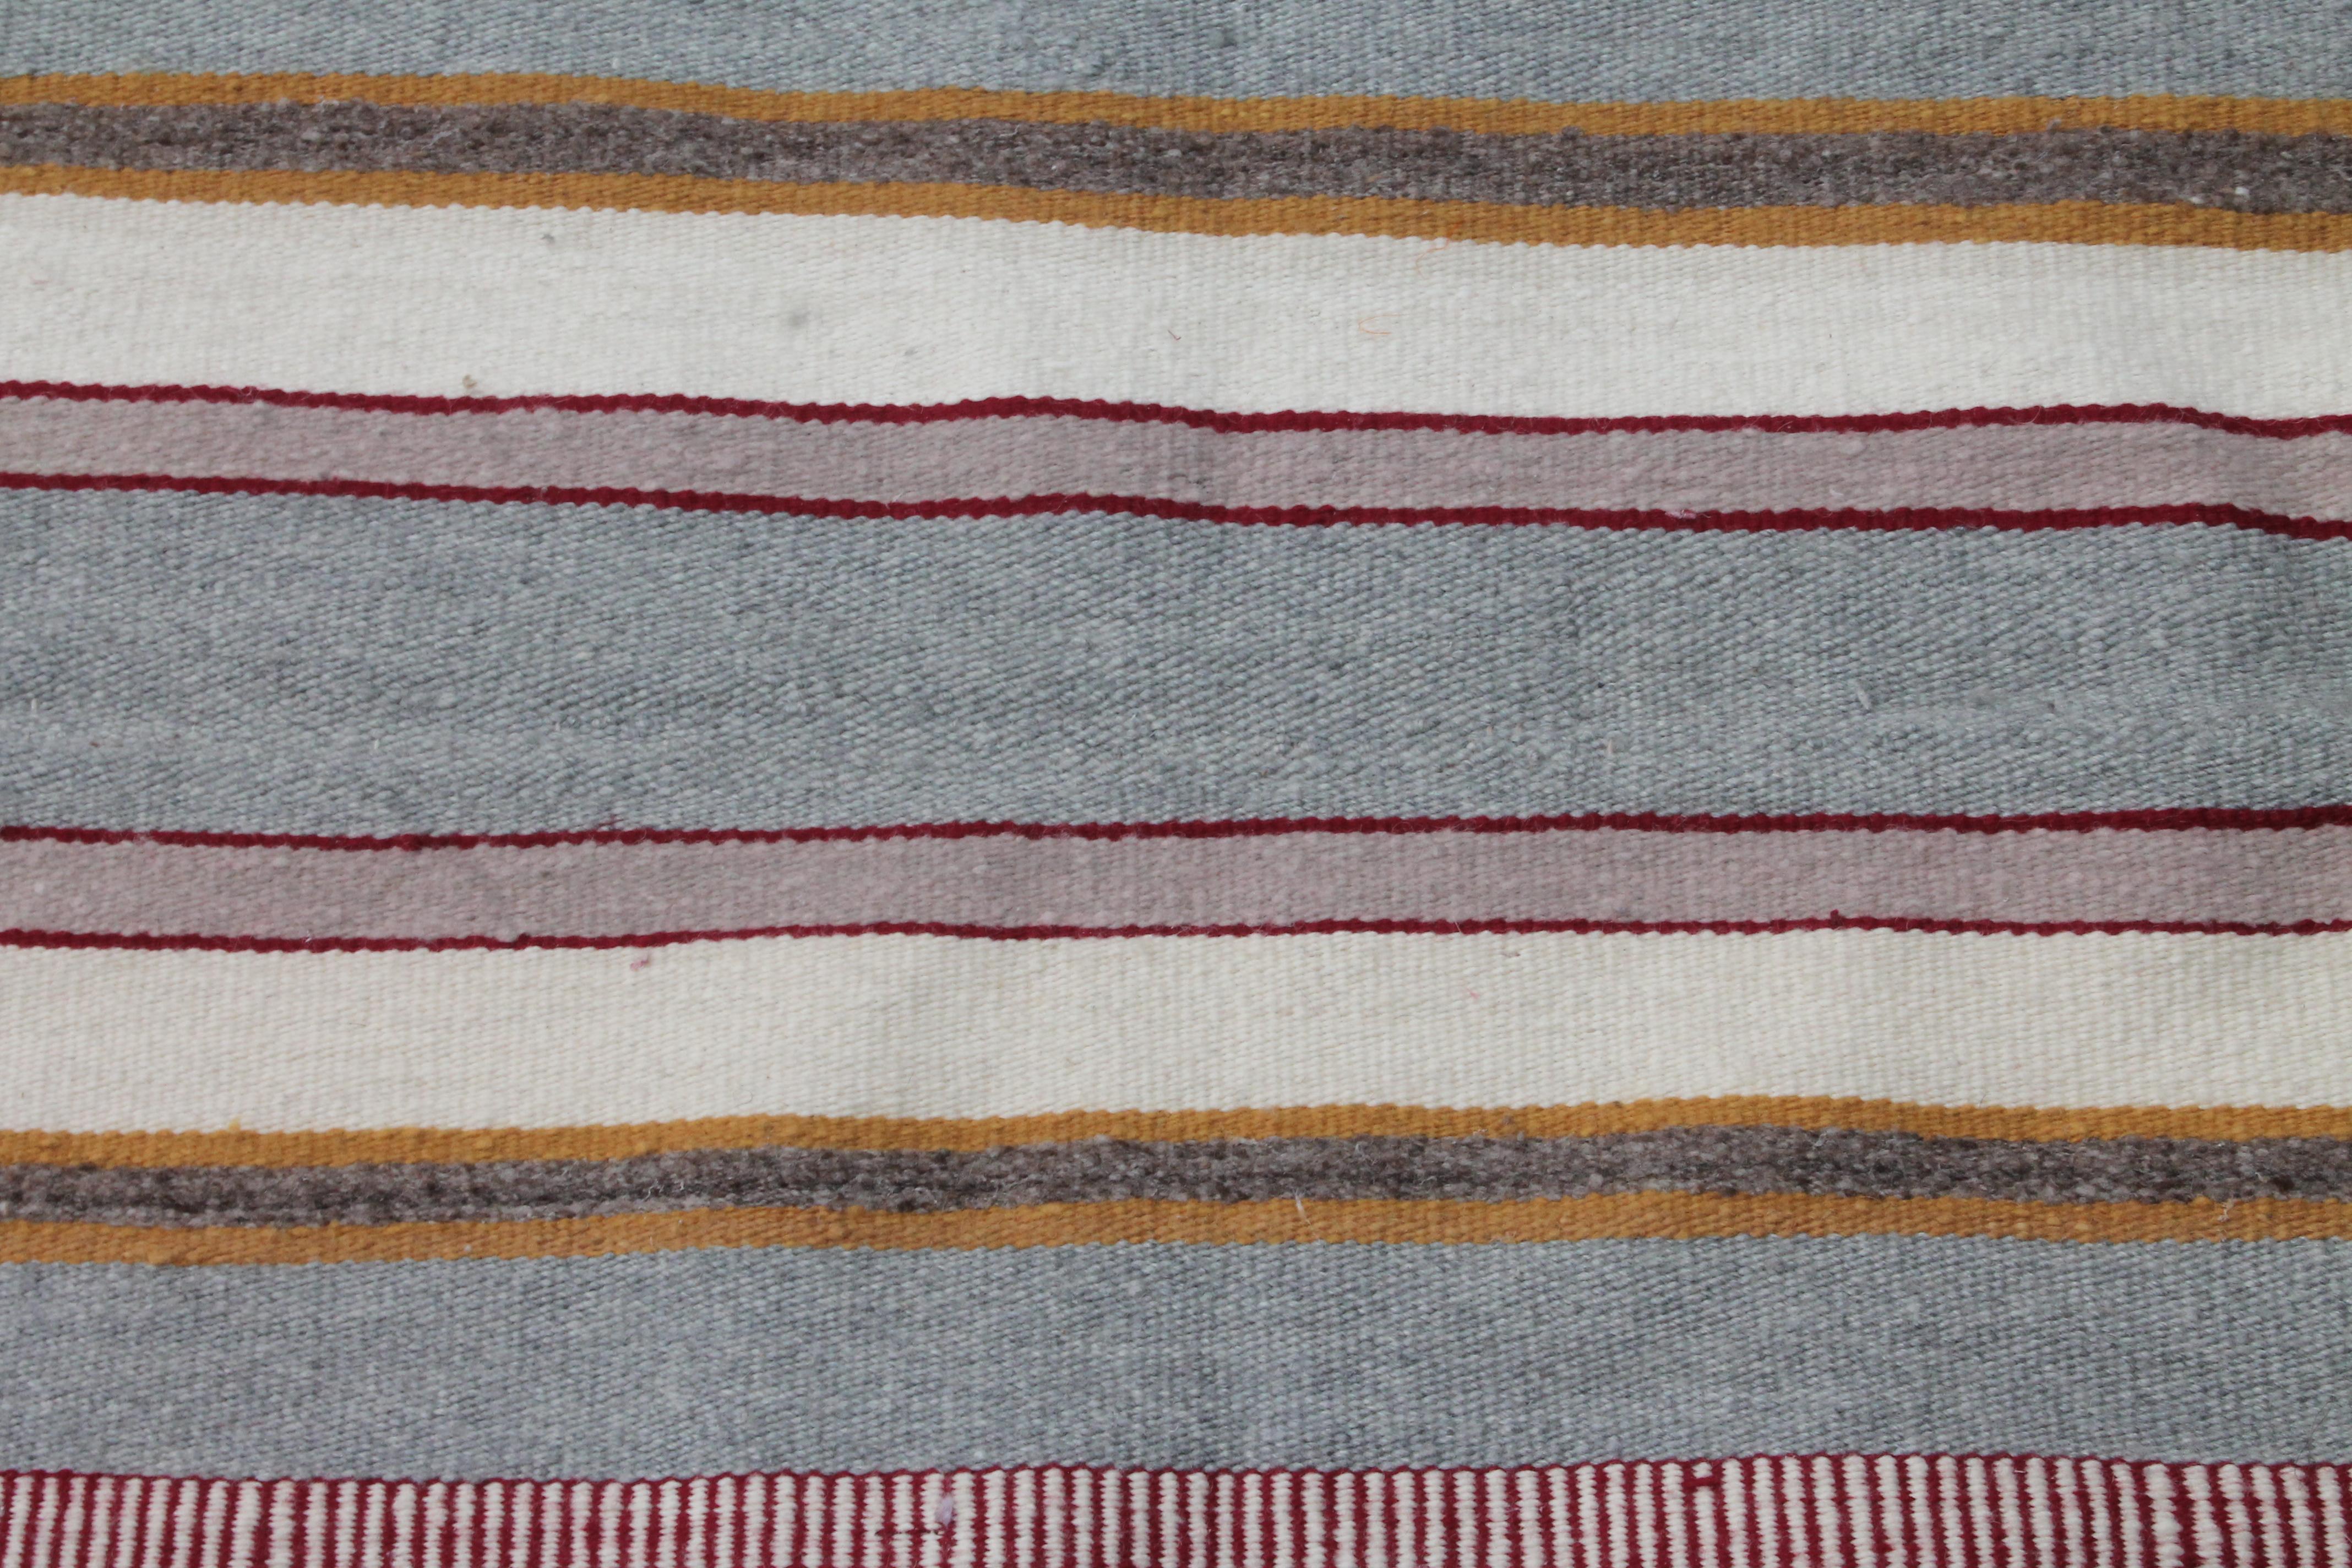 Navajo saddle blanket weaving with the original ties. This weaving is simple stripes and in very good condition.